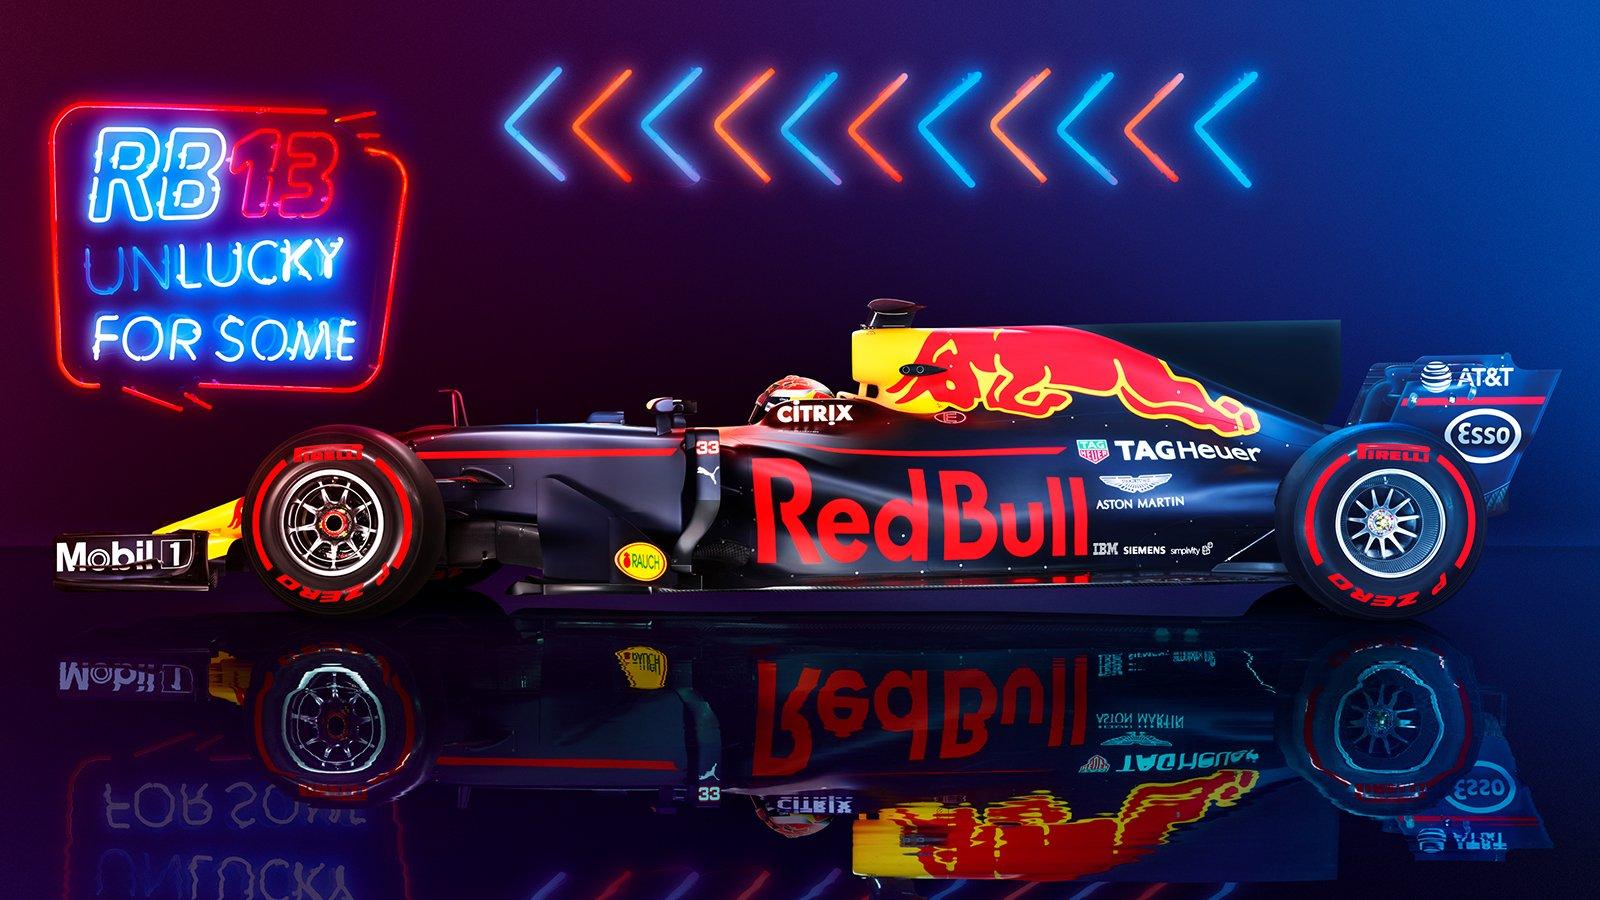 Aston Martin Red Bull Racing the #RB13